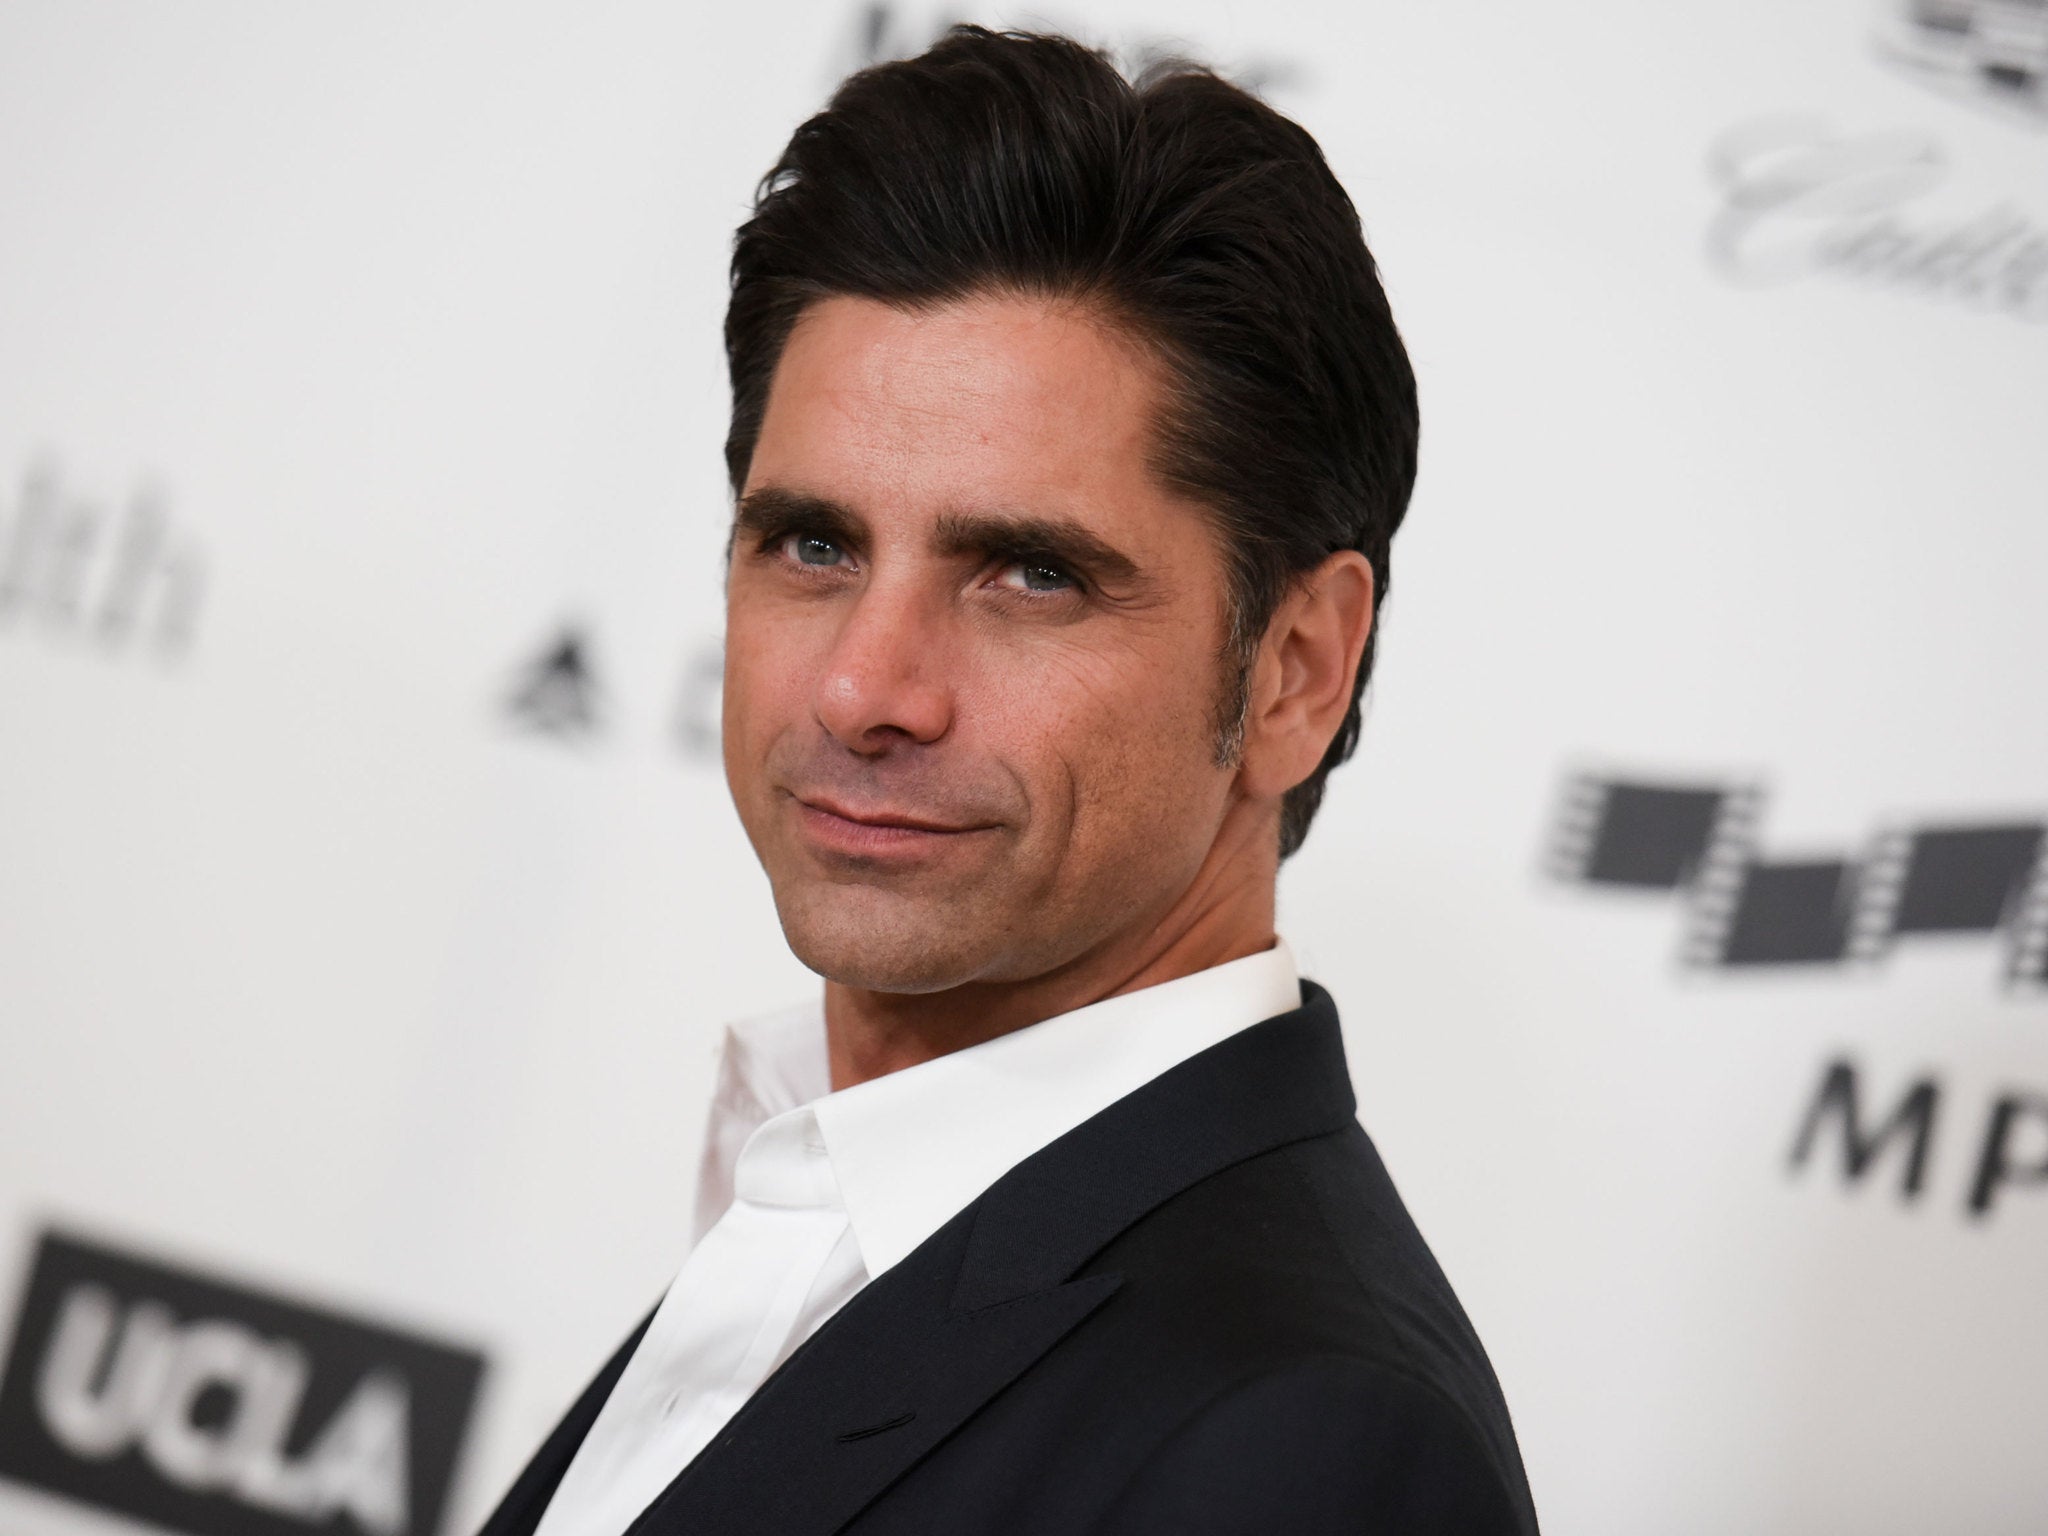 Full House star John Stamos has been arrested for drink driving